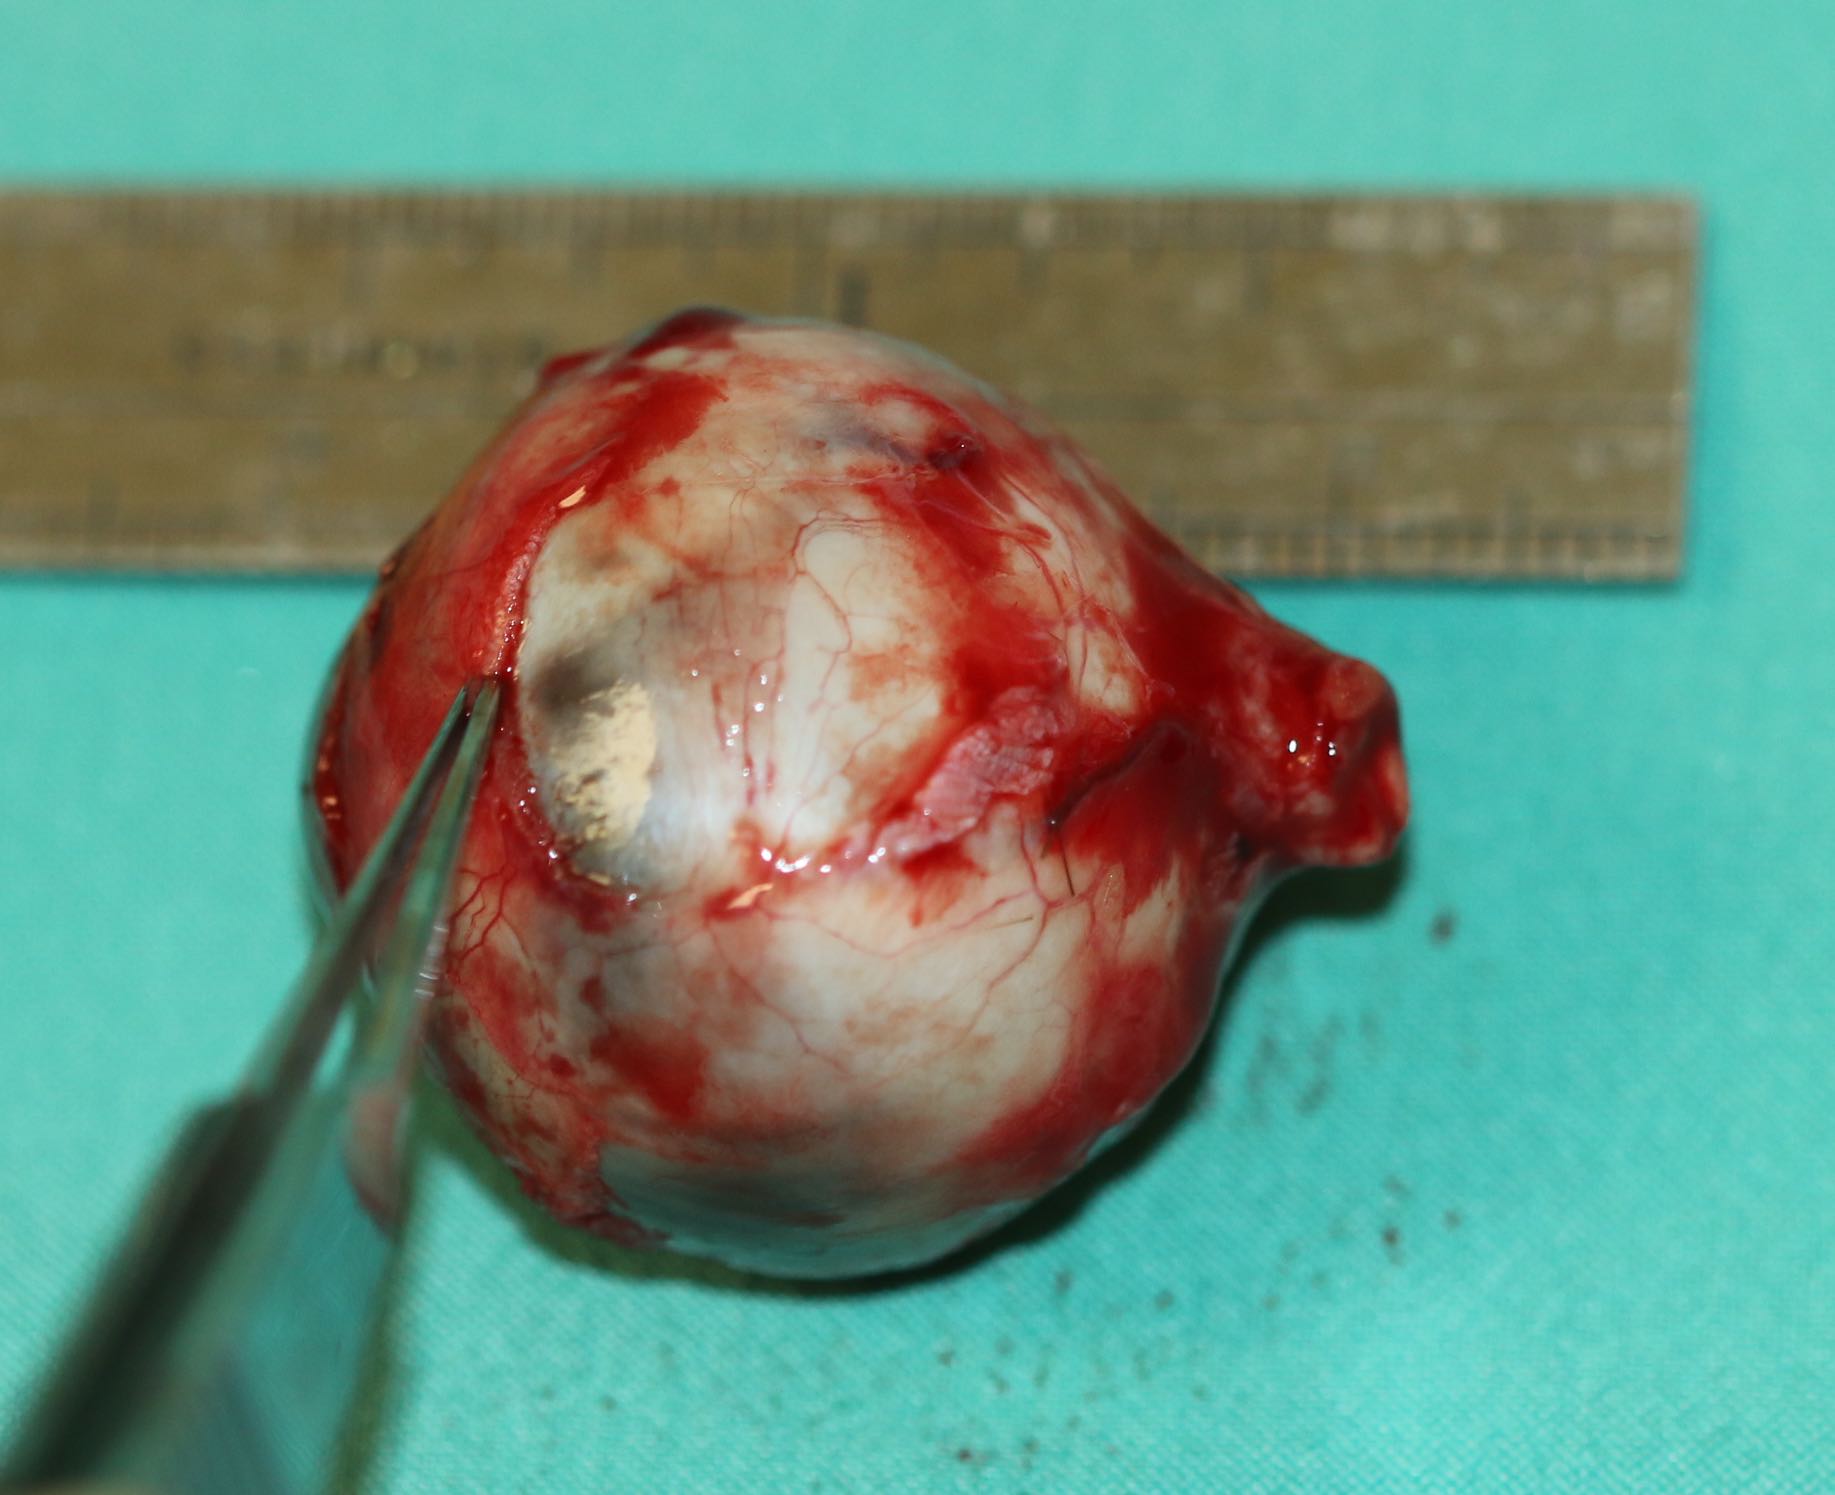 Enucleation. A globe full of tumor may make it difficult to obtain an adequate length of optic nerve during enucleation as seen here